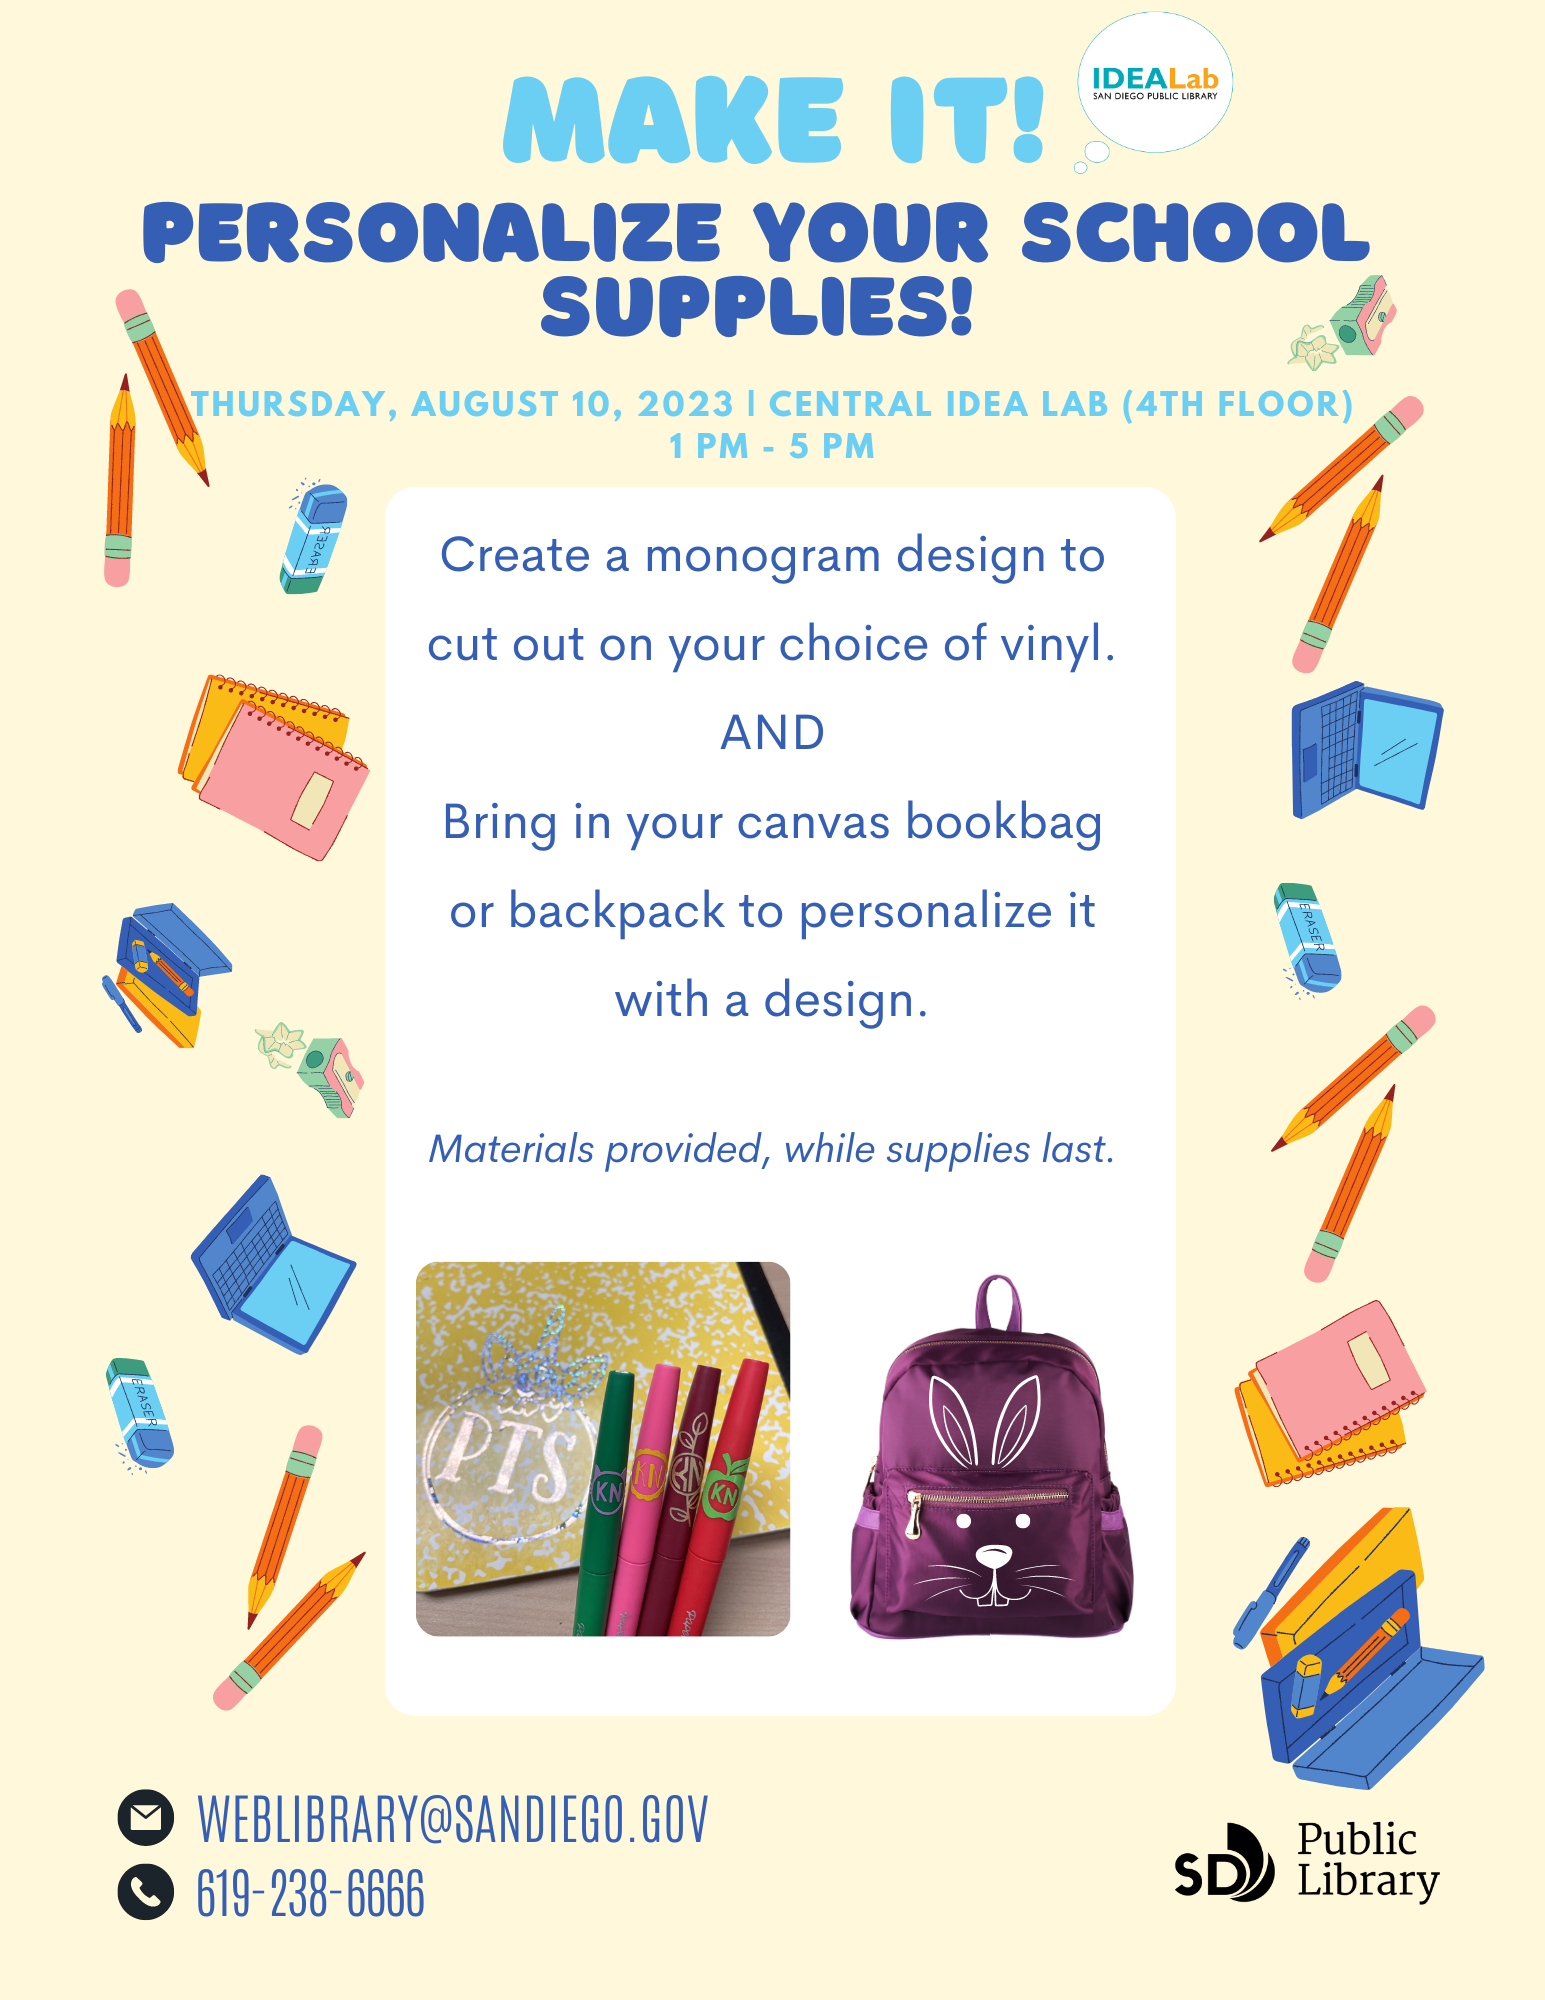 Personalize your school supplies using die-cut and dye sublimated vinyl